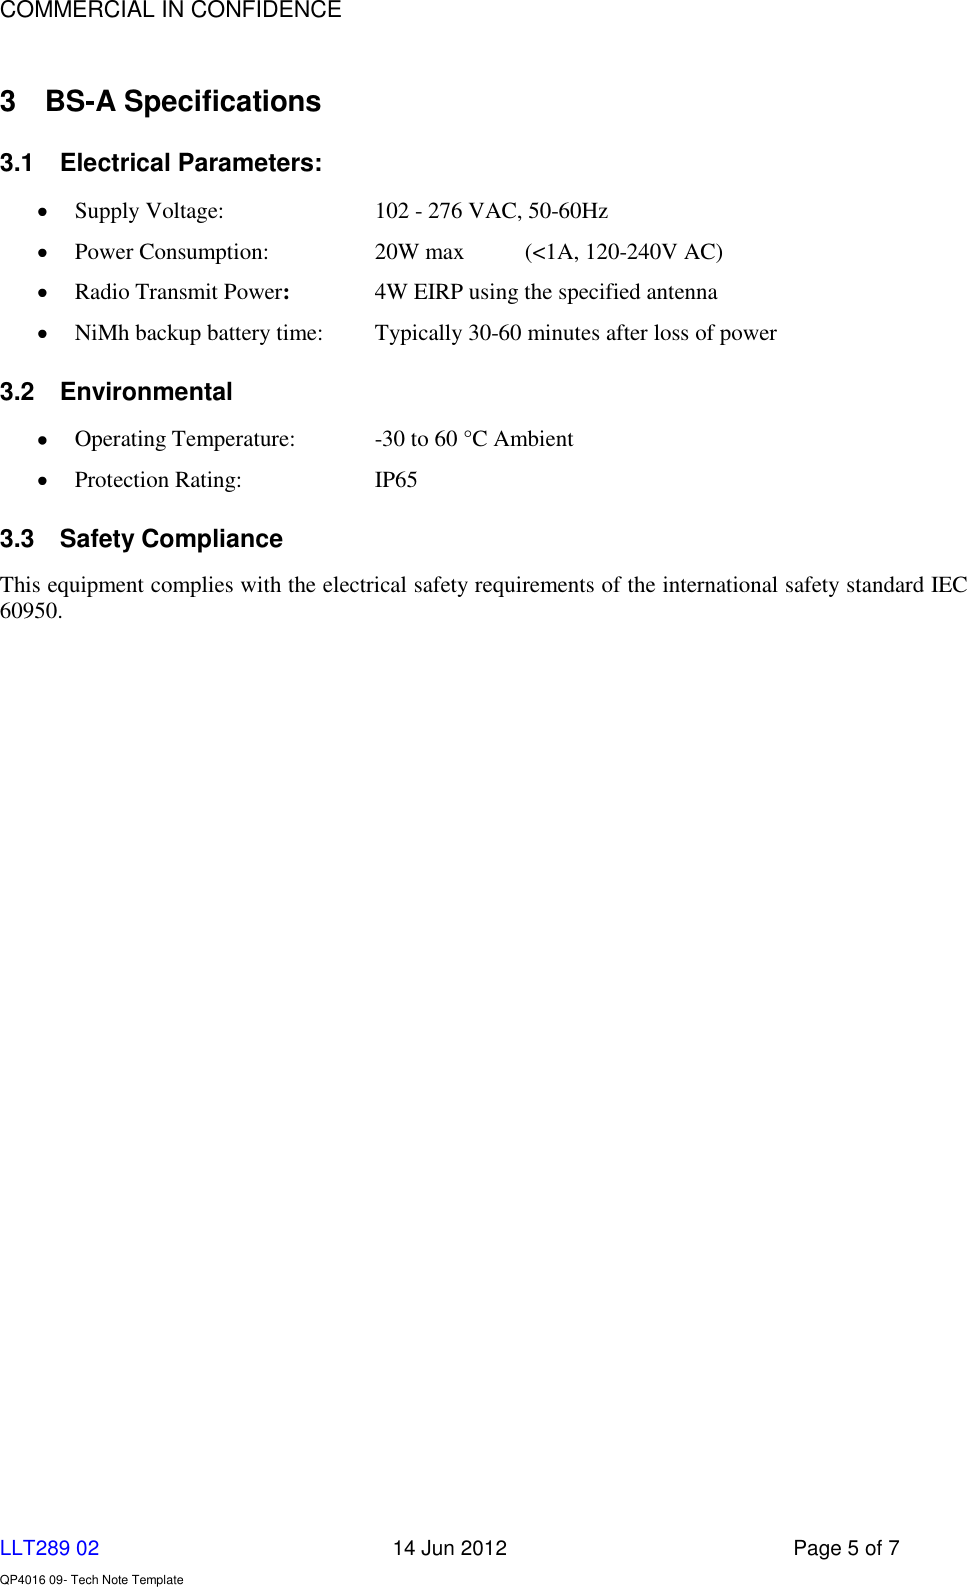    COMMERCIAL IN CONFIDENCE  LLT289 02      14 Jun 2012  Page 5 of 7  QP4016 09- Tech Note Template   3  BS-A Specifications 3.1  Electrical Parameters:      Supply Voltage:     102 - 276 VAC, 50-60Hz     Power Consumption:    20W max  (&lt;1A, 120-240V AC)      Radio Transmit Power:     4W EIRP using the specified antenna  NiMh backup battery time:  Typically 30-60 minutes after loss of power 3.2  Environmental  Operating Temperature:   -30 to 60 °C Ambient  Protection Rating:    IP65 3.3  Safety Compliance This equipment complies with the electrical safety requirements of the international safety standard IEC 60950. 